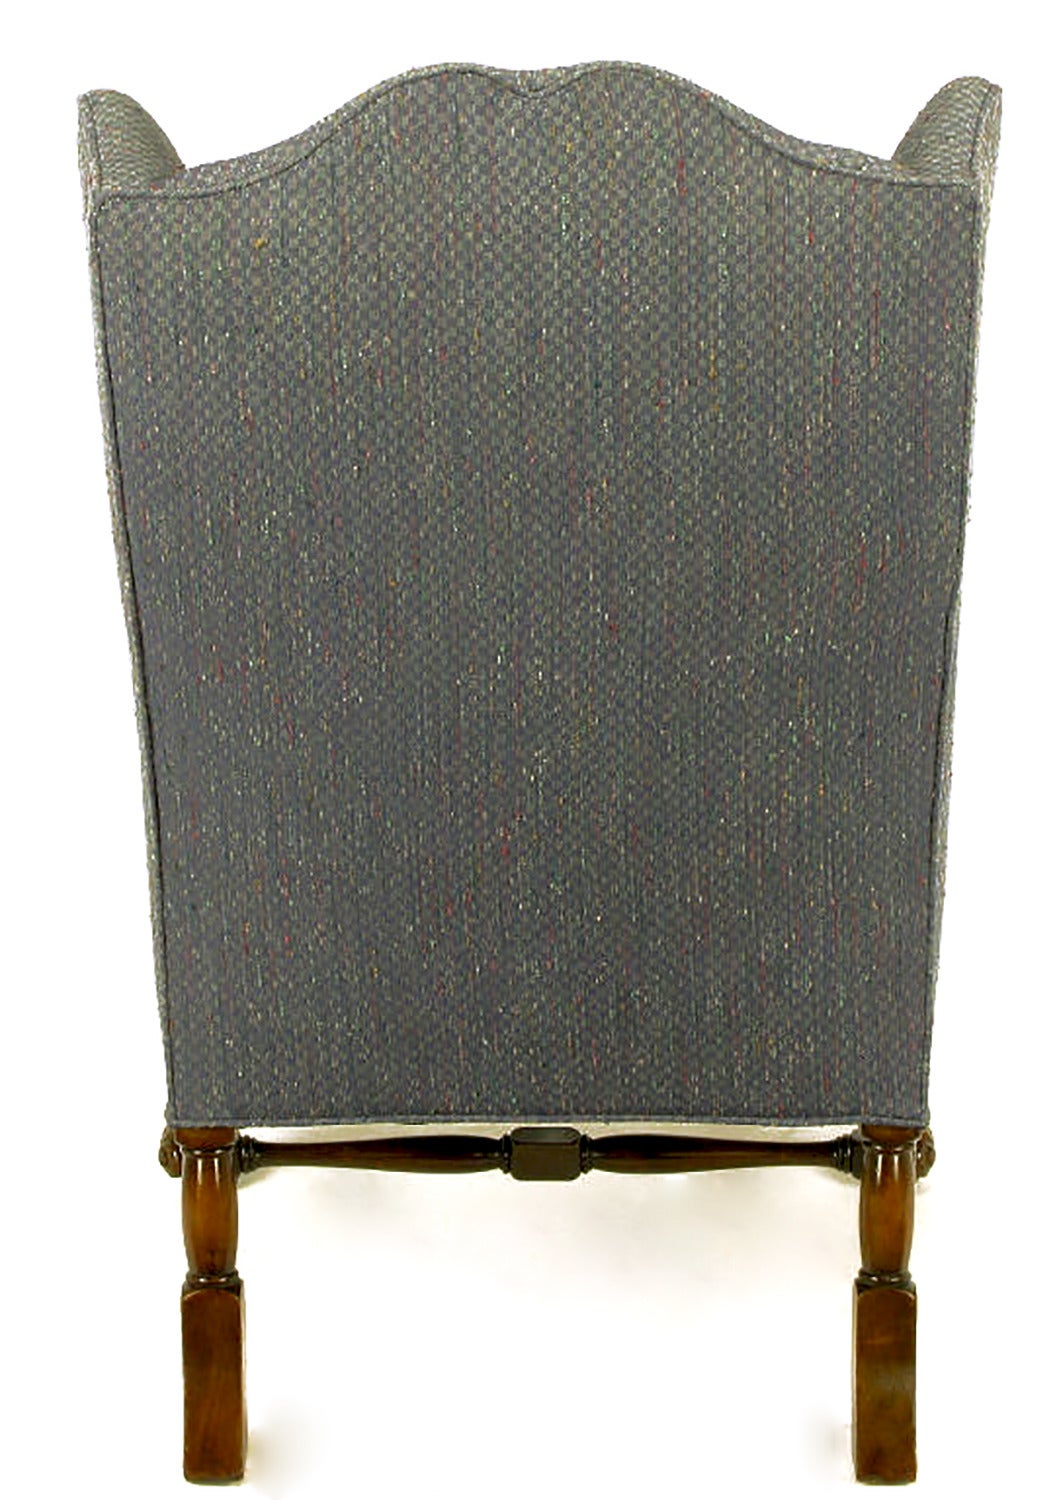 Mid-20th Century Italian Regency Upholstered Wing Chair with Carved Wood Frame